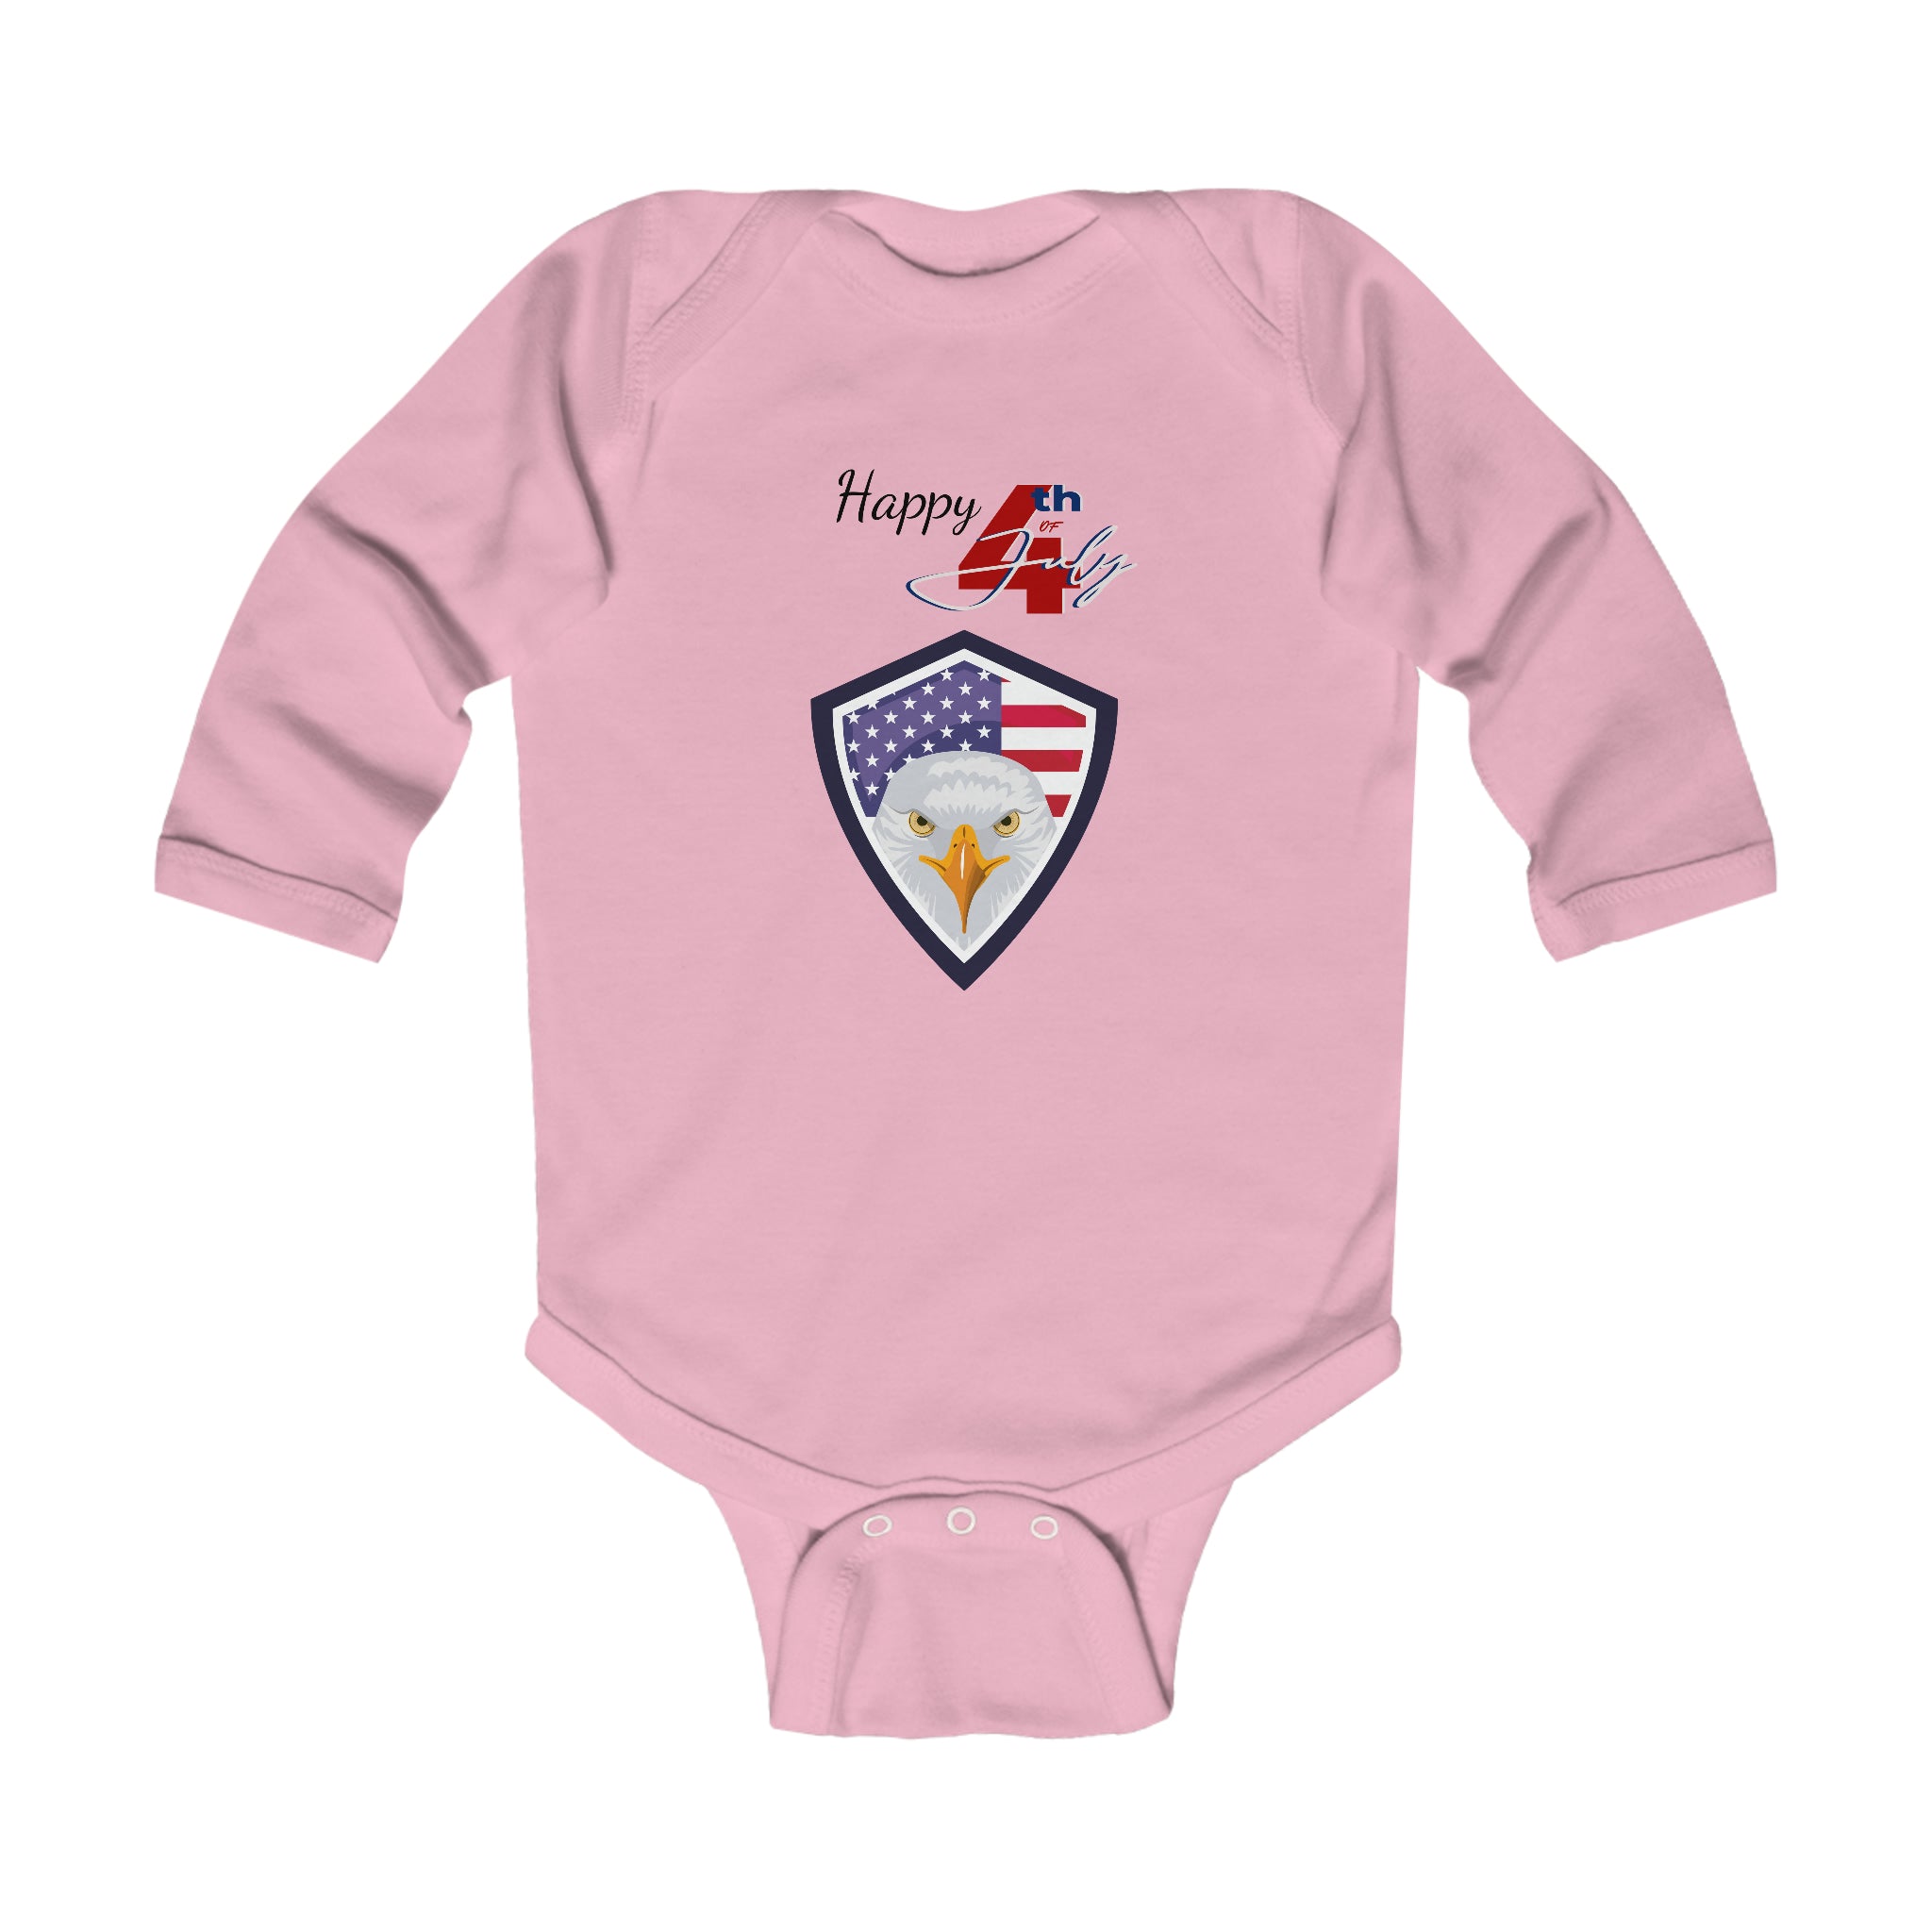 Happy 4th of July American Flag Eagle Design Long Sleeve Baby Bodysuit